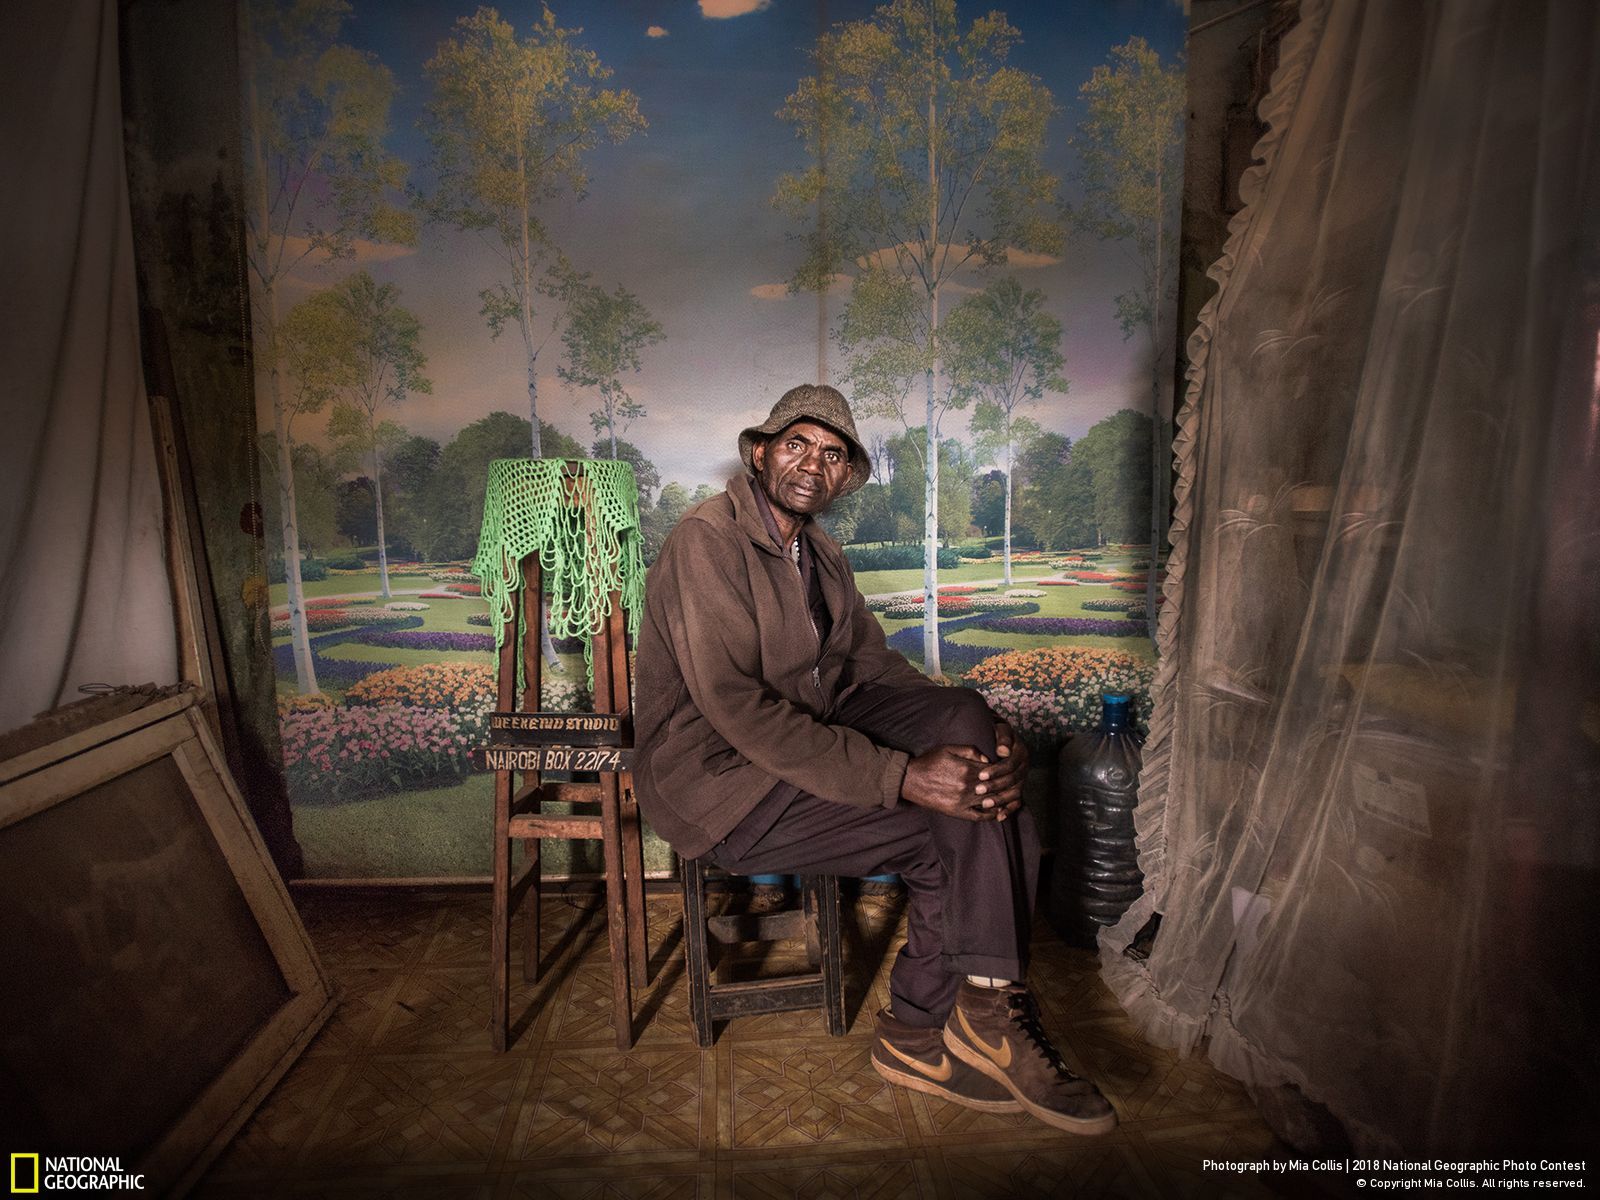 Sunday Best At Weekend Studio, © Mia Collis, First Place, People, National Geographic Photo Contest